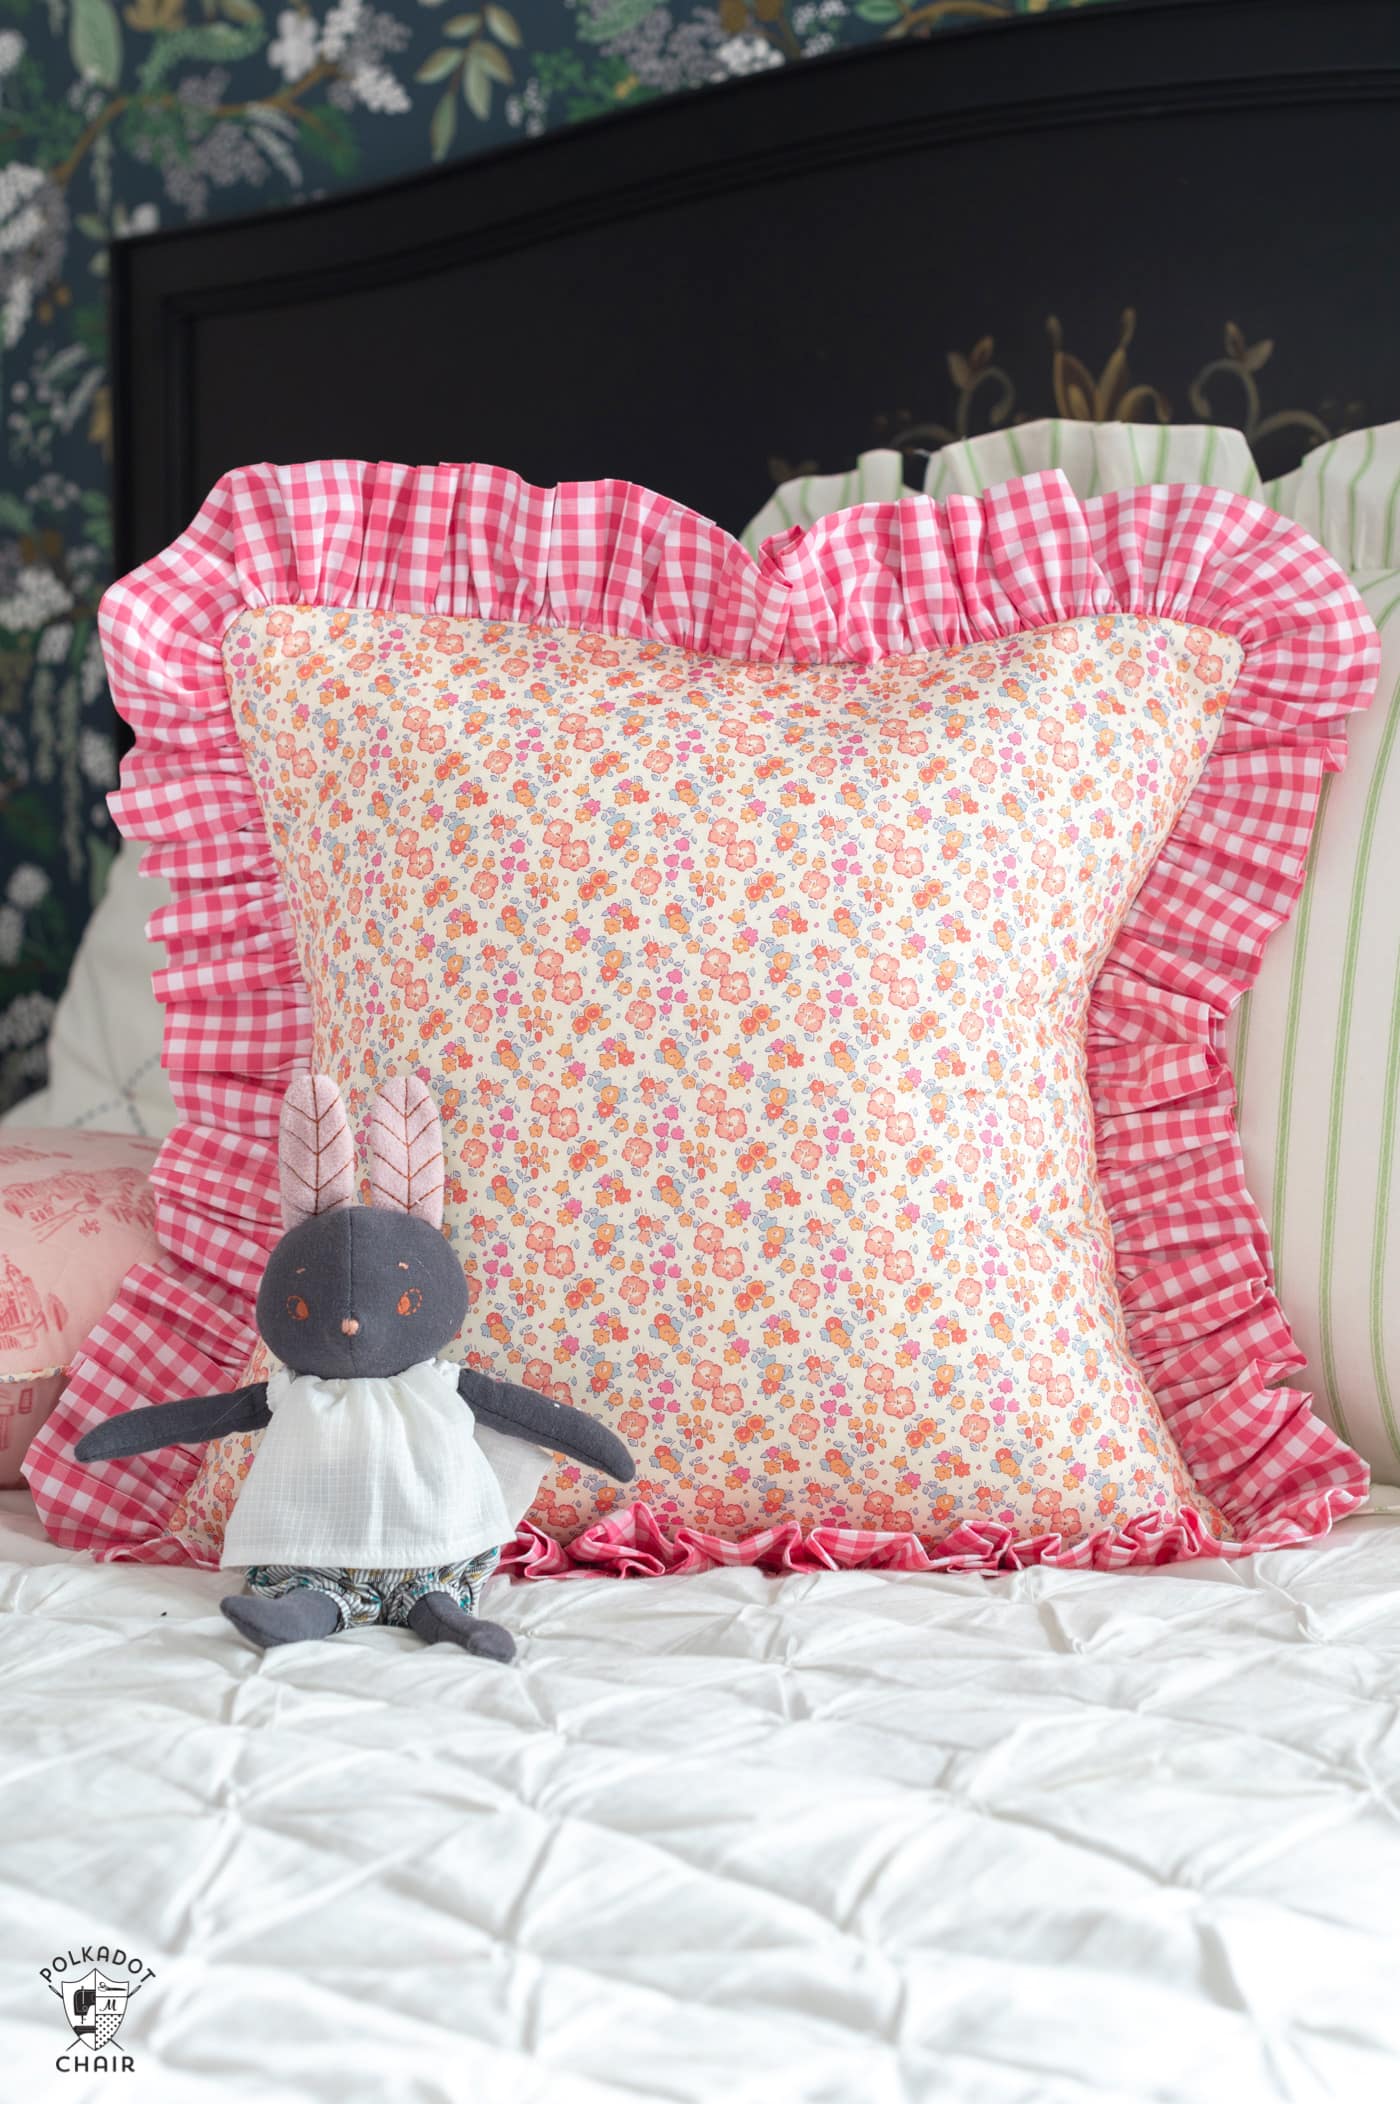 How to Make a Pillow Sham with a Ruffle Edge